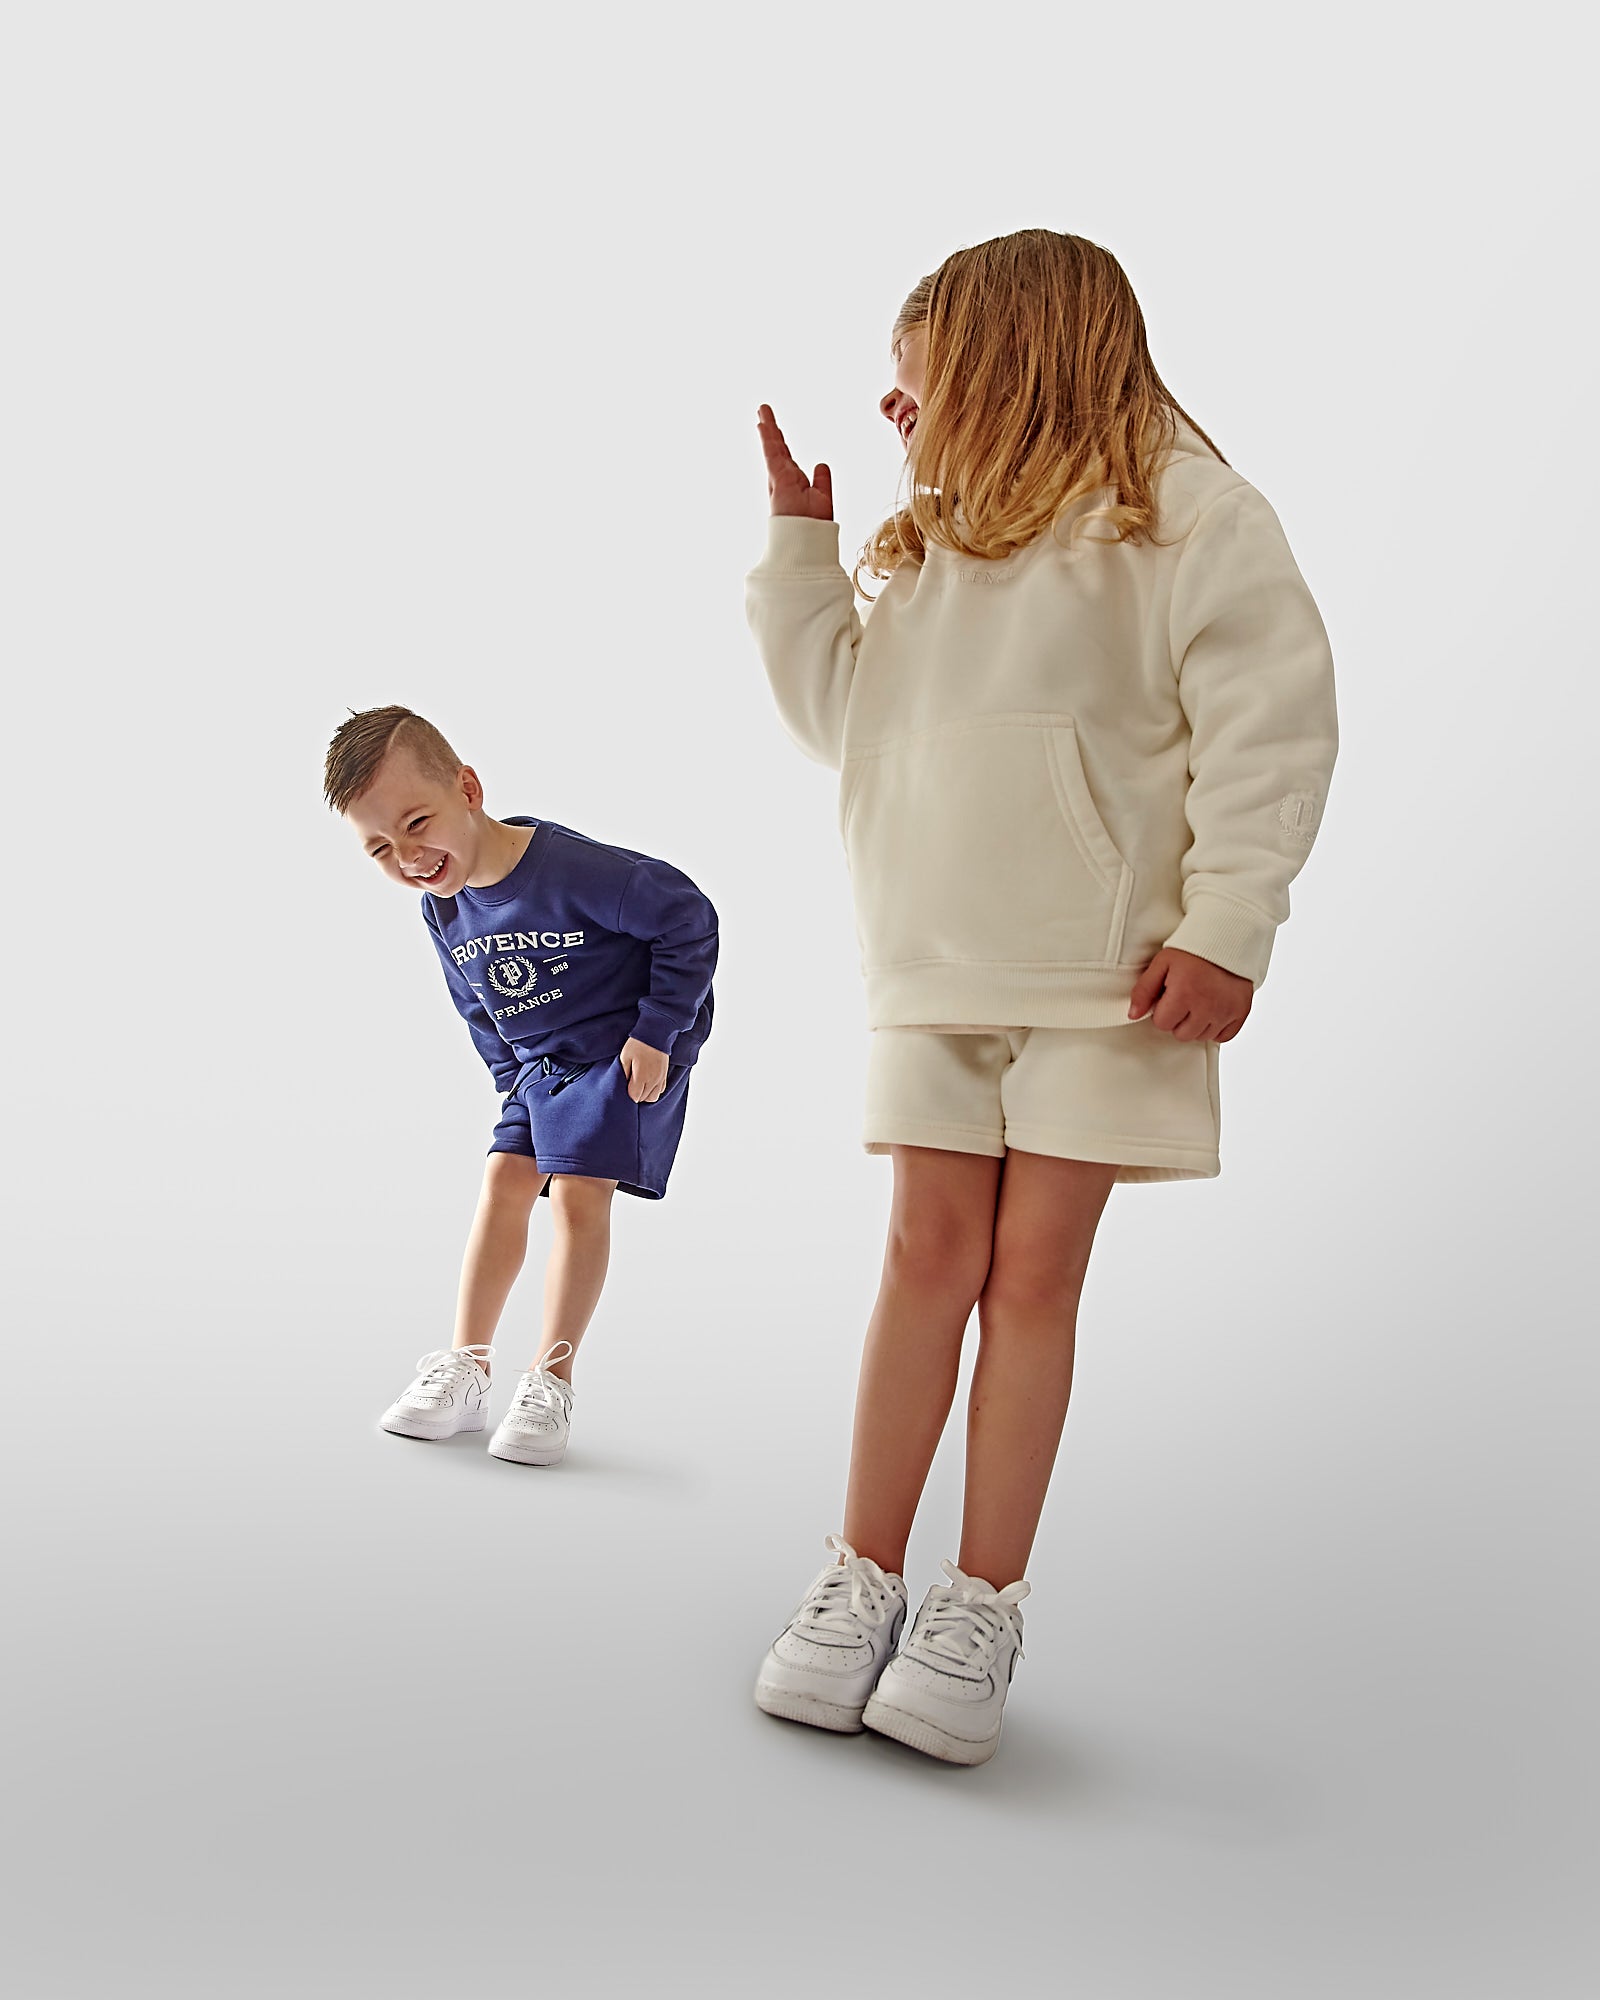 LUXURY FOR EVERYONE : PROVENCE KIDS CLOTHING